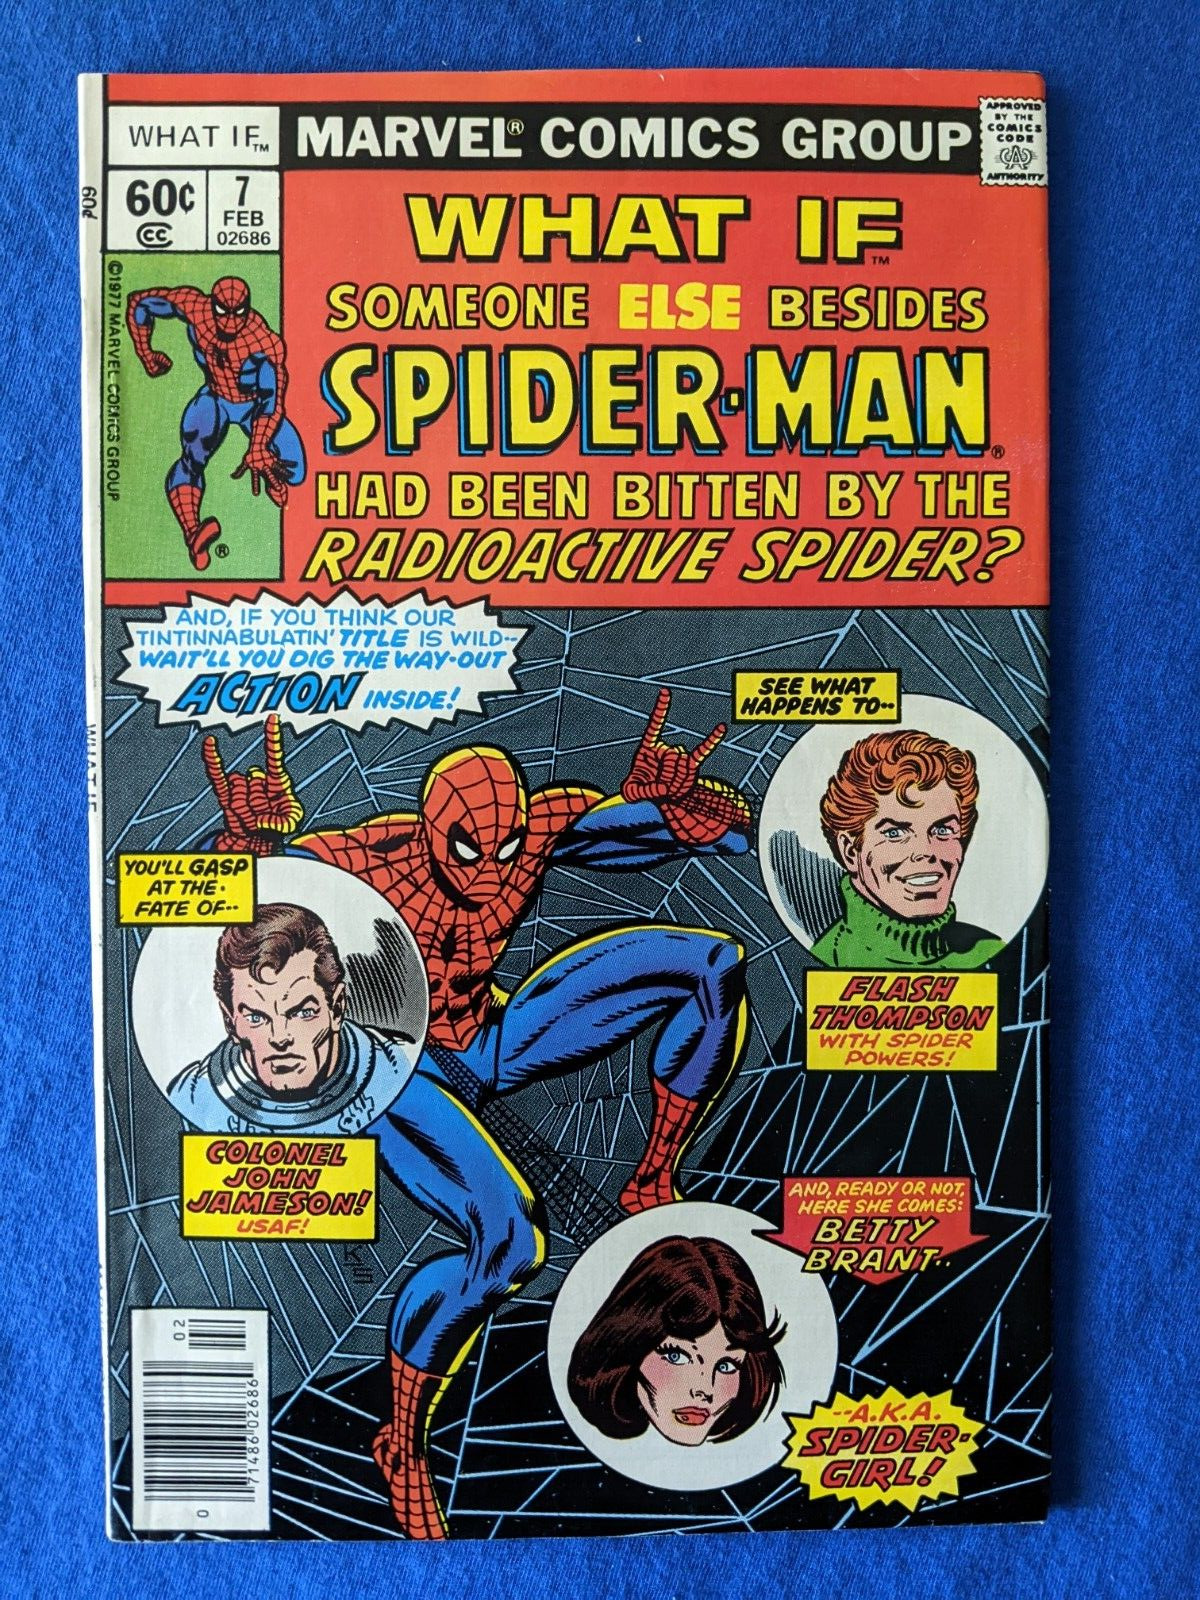 WHAT IF? #7 (1978) What If Someone Else Besides Spider-Man Had Been Bitten?